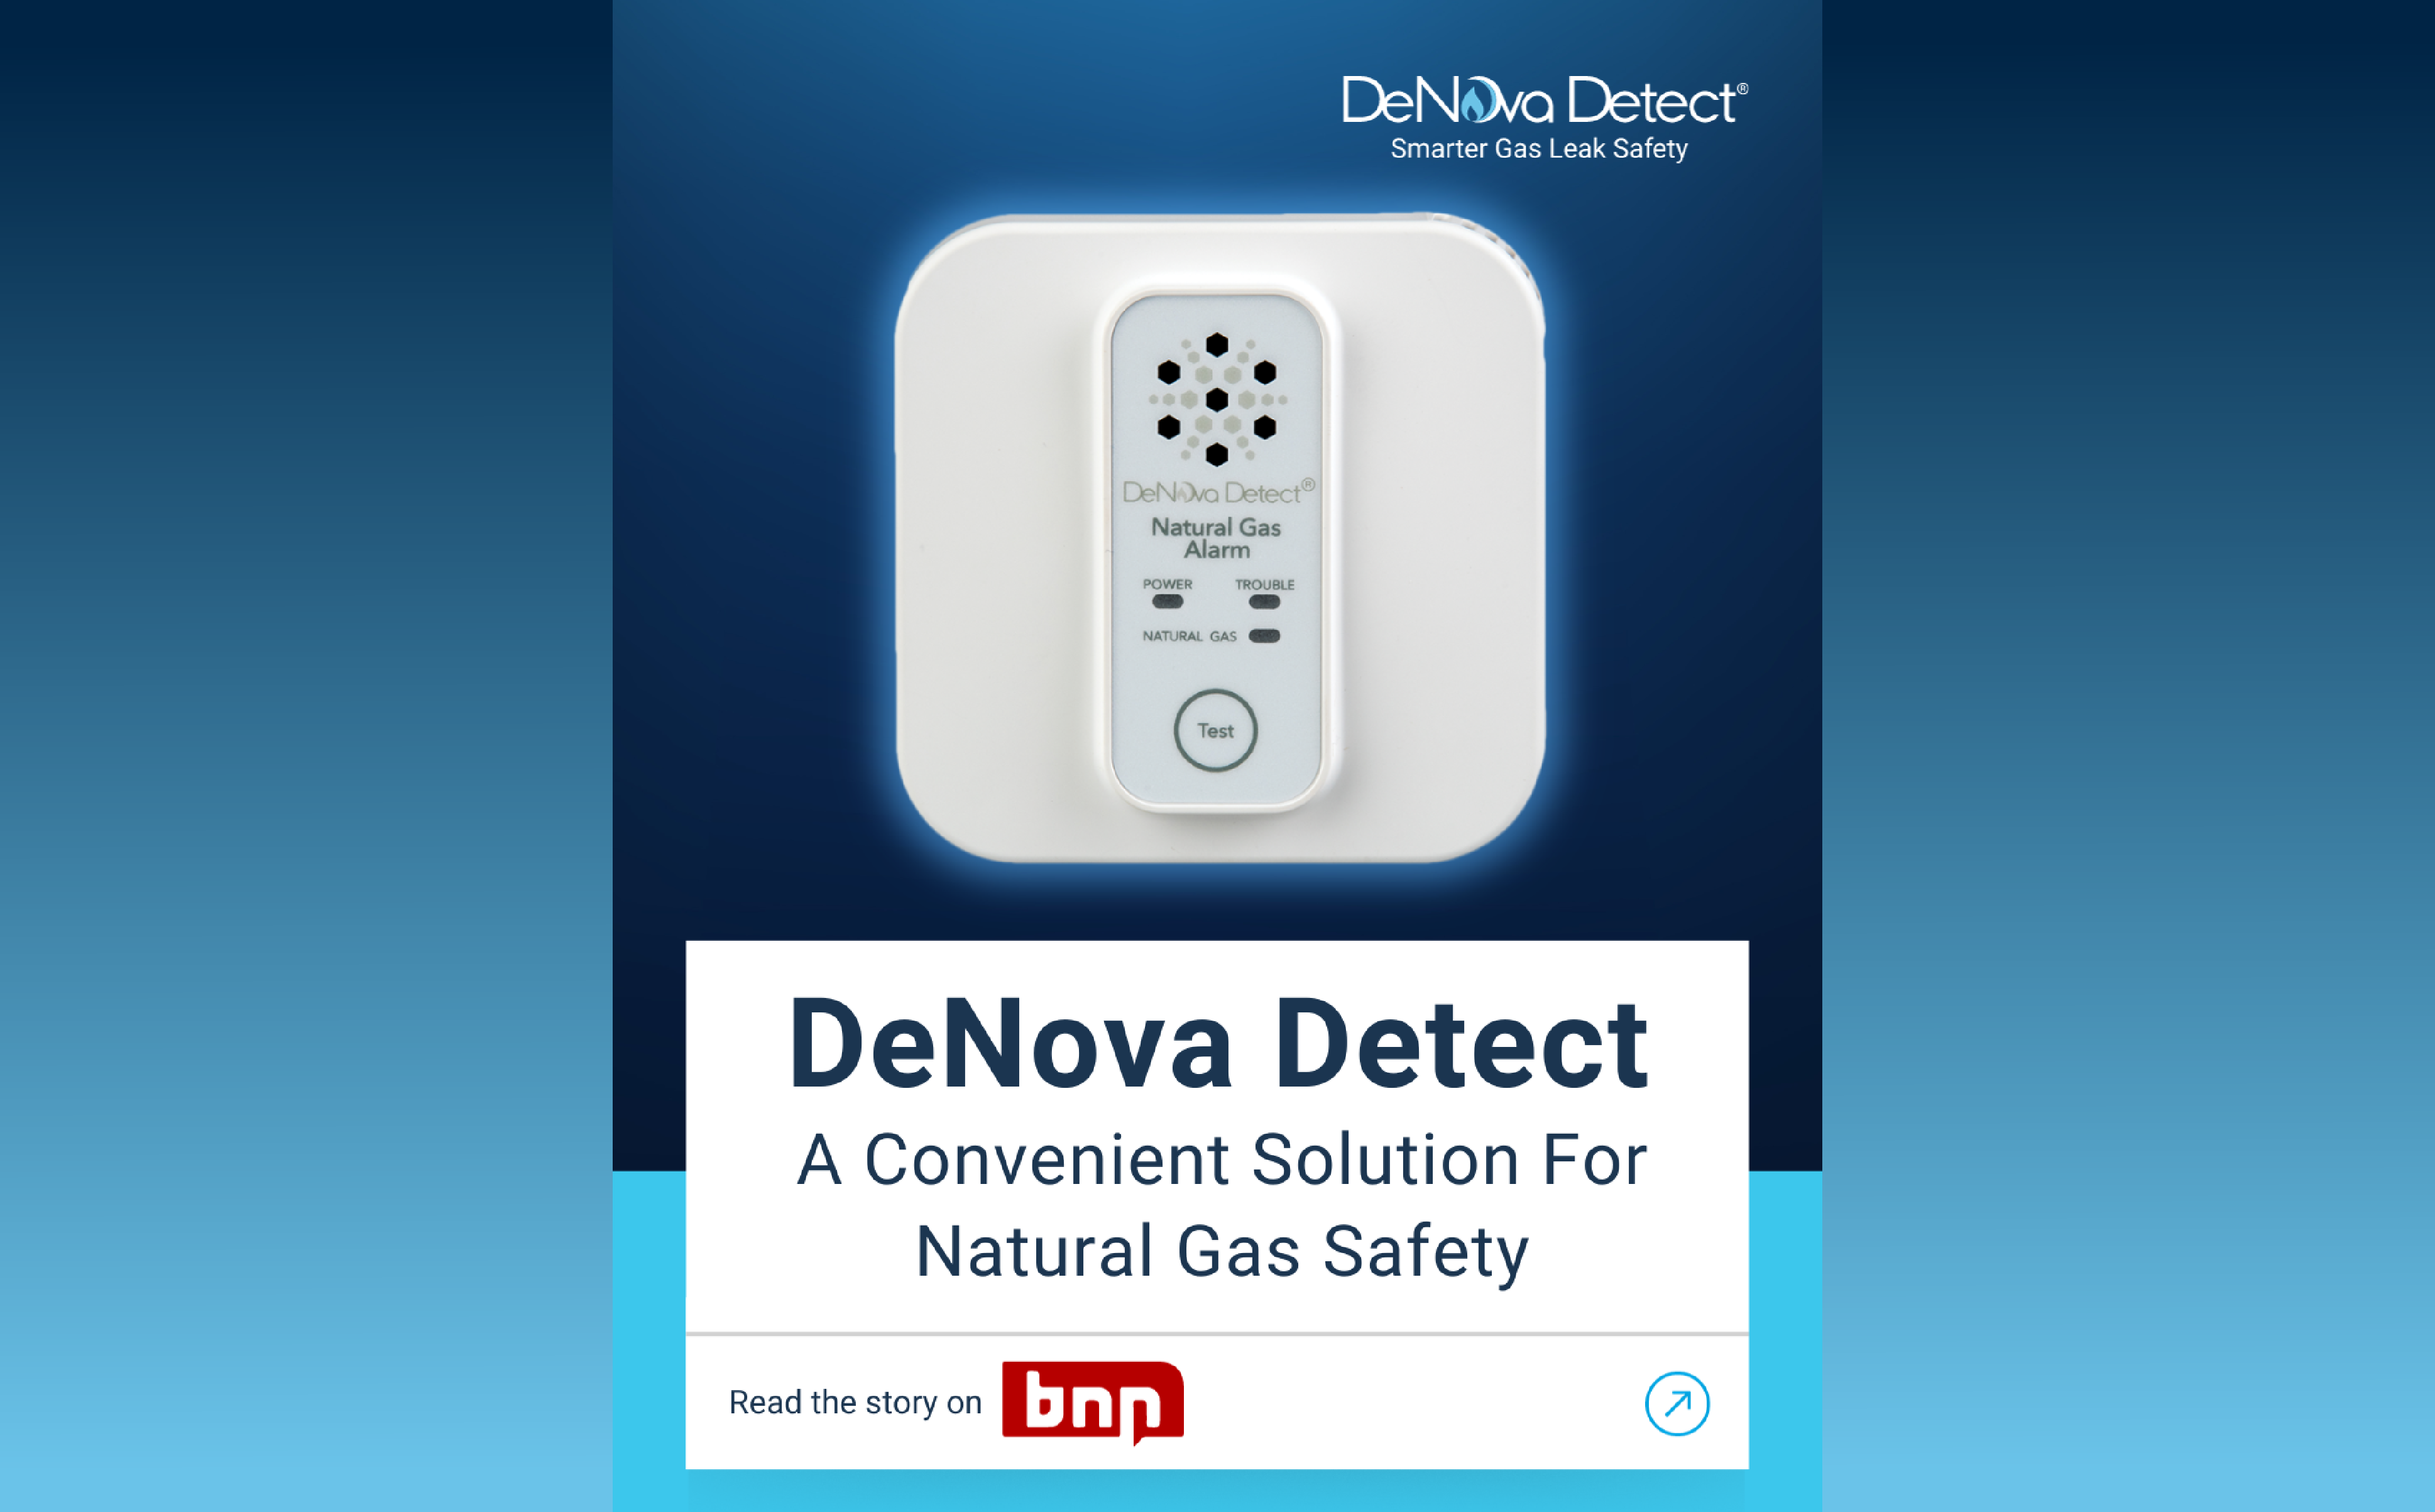 BNN Article Features DeNova Detect and the Positive Impact of Its Technology